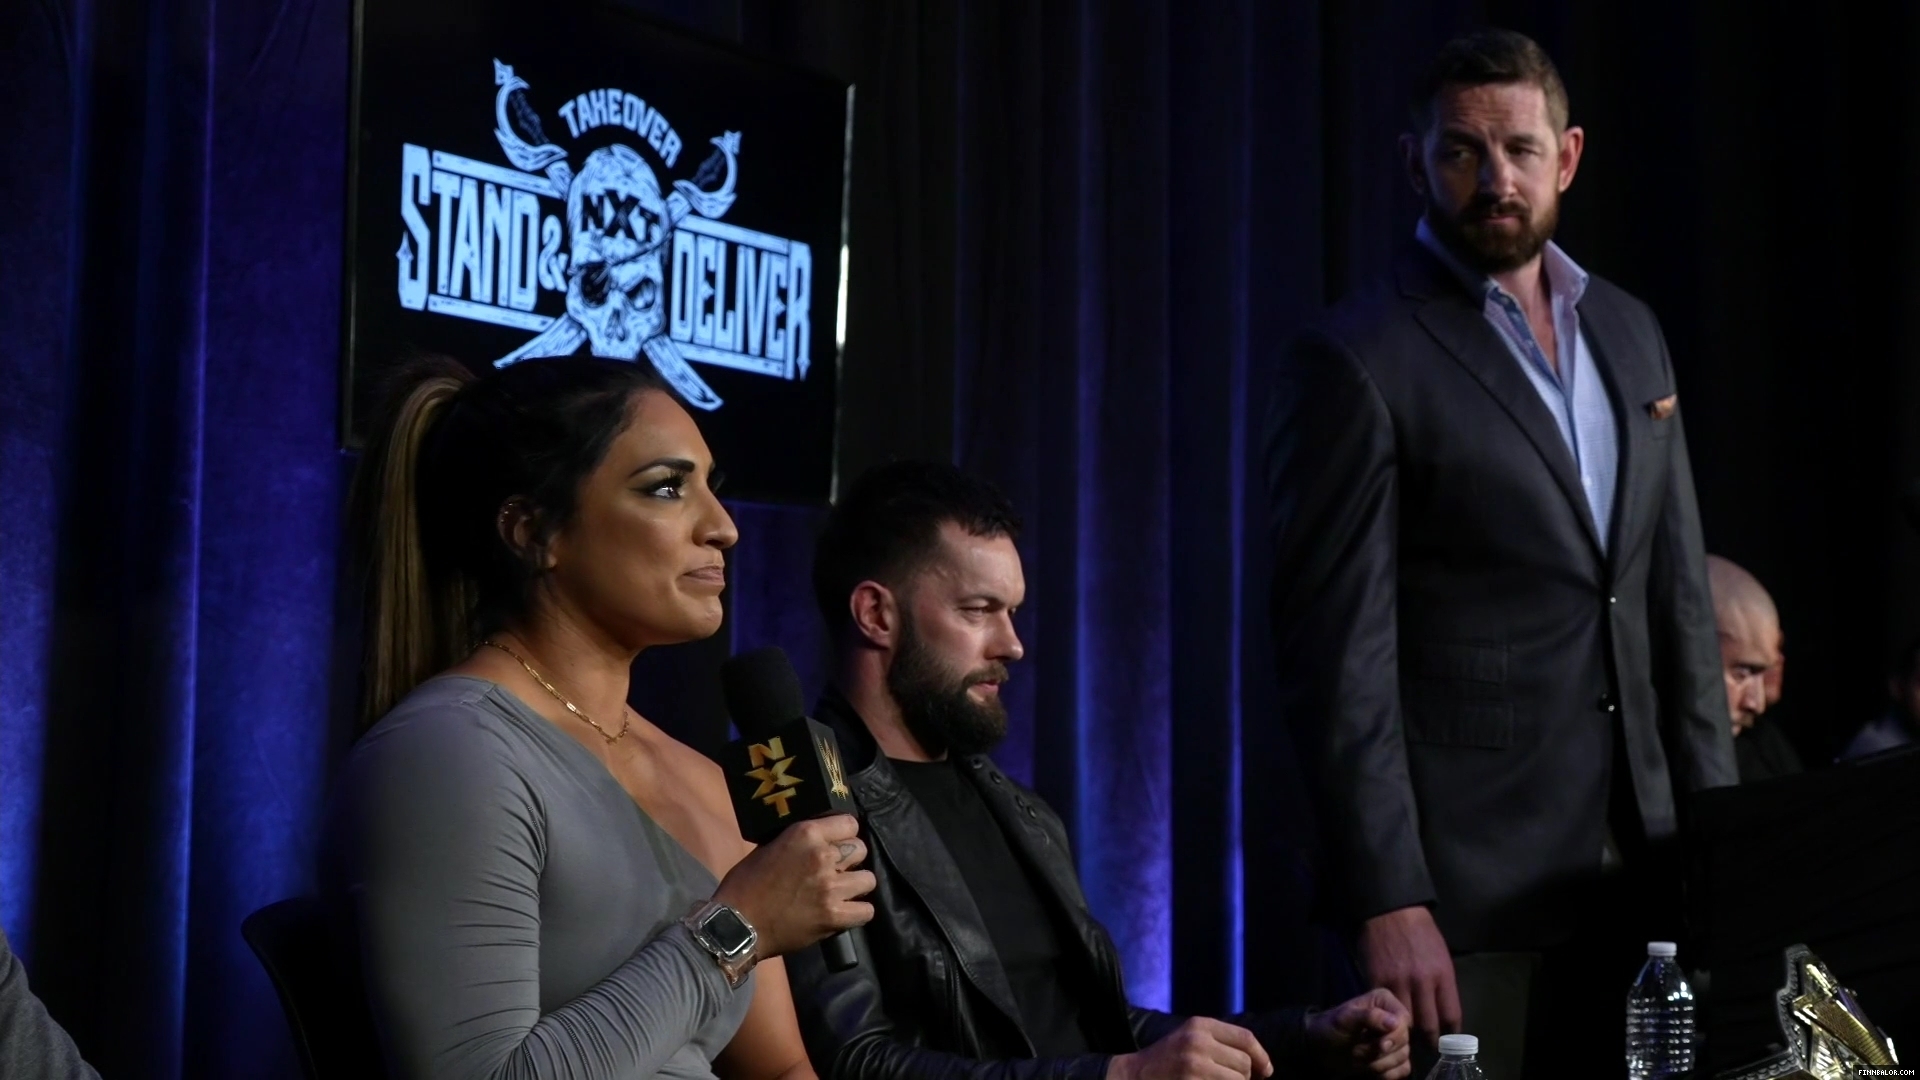 WWE_NXT_TakeOver_Stand_and_Deliver_2021_Global_Press_Conference_1080p_WEB_h264-HEEL_mp41963.jpg